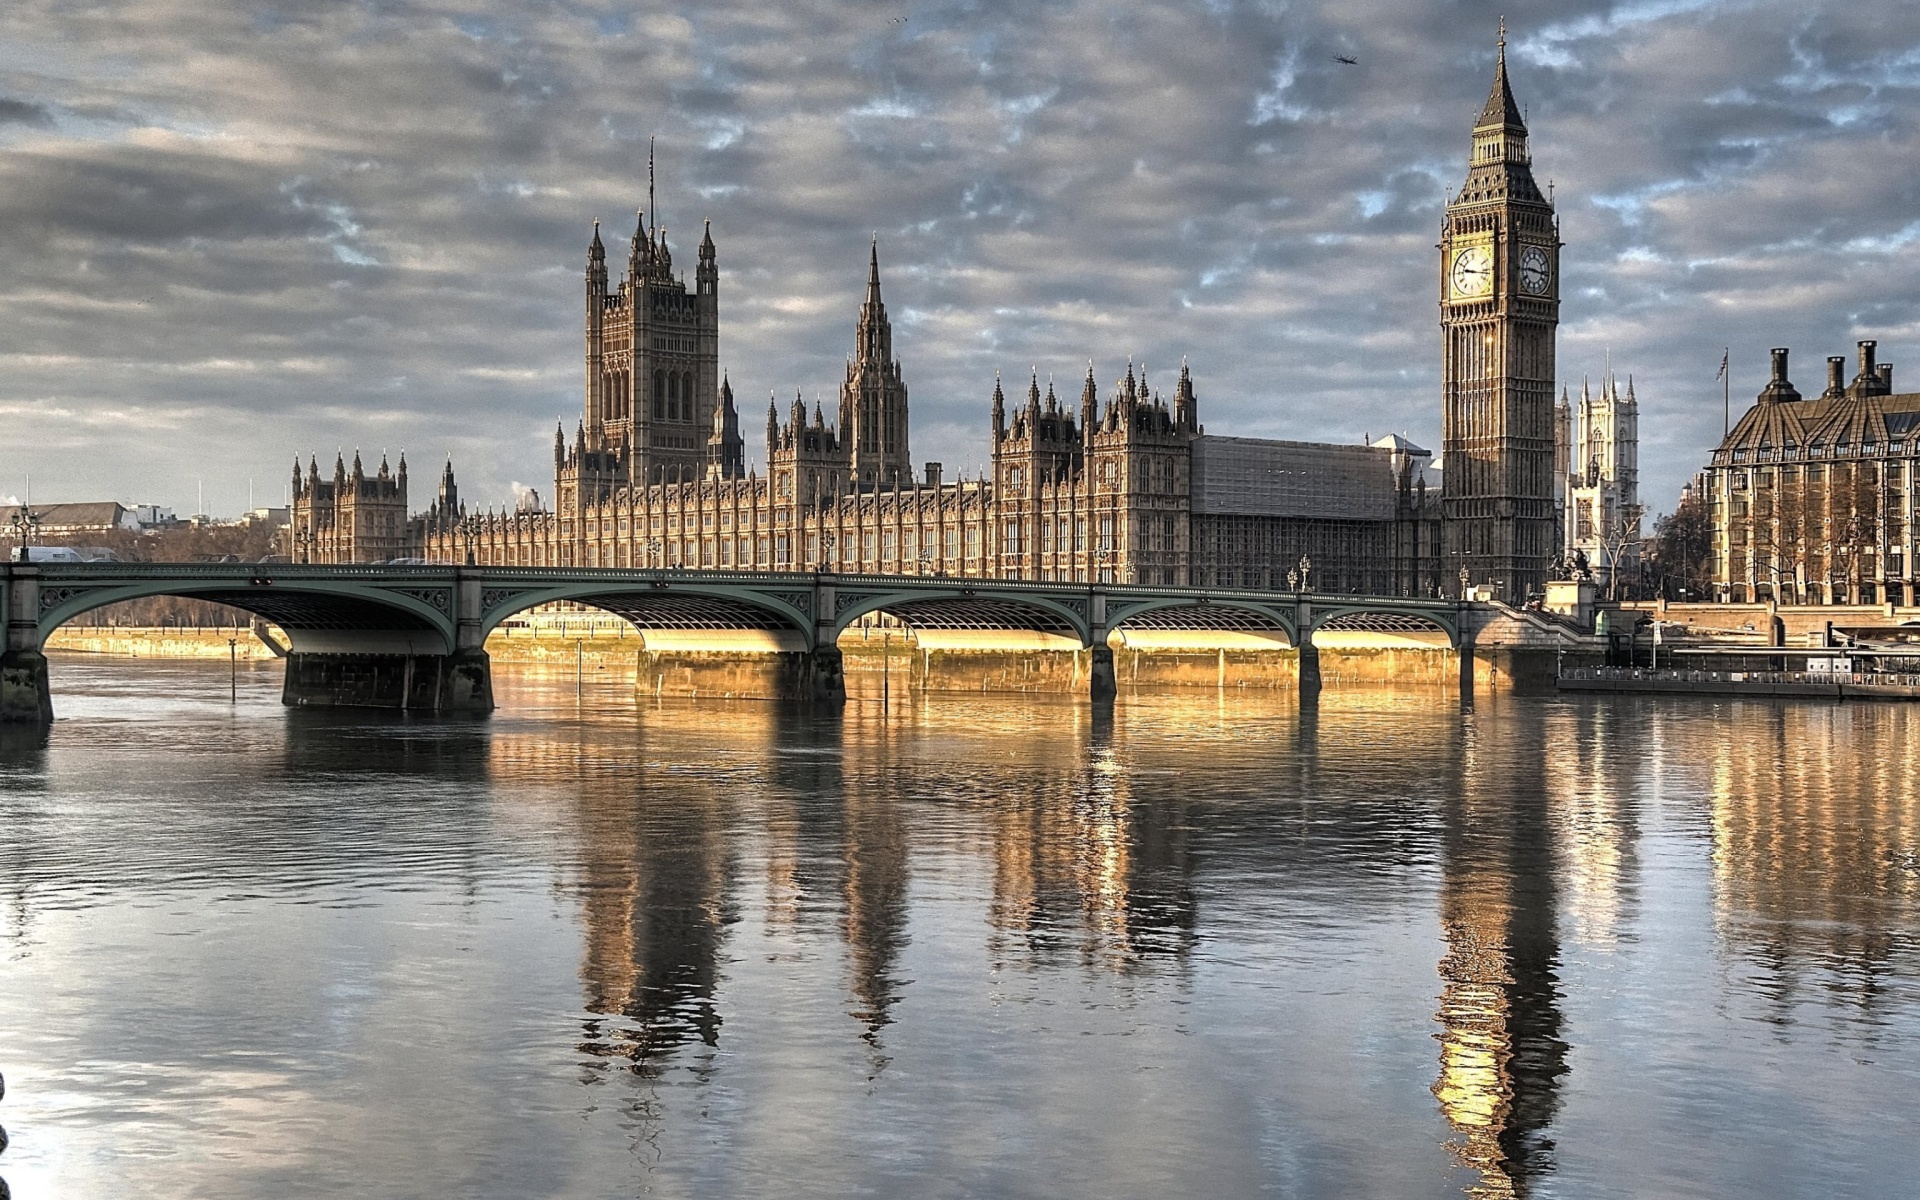 Das Palace of Westminster in London Wallpaper 1920x1200